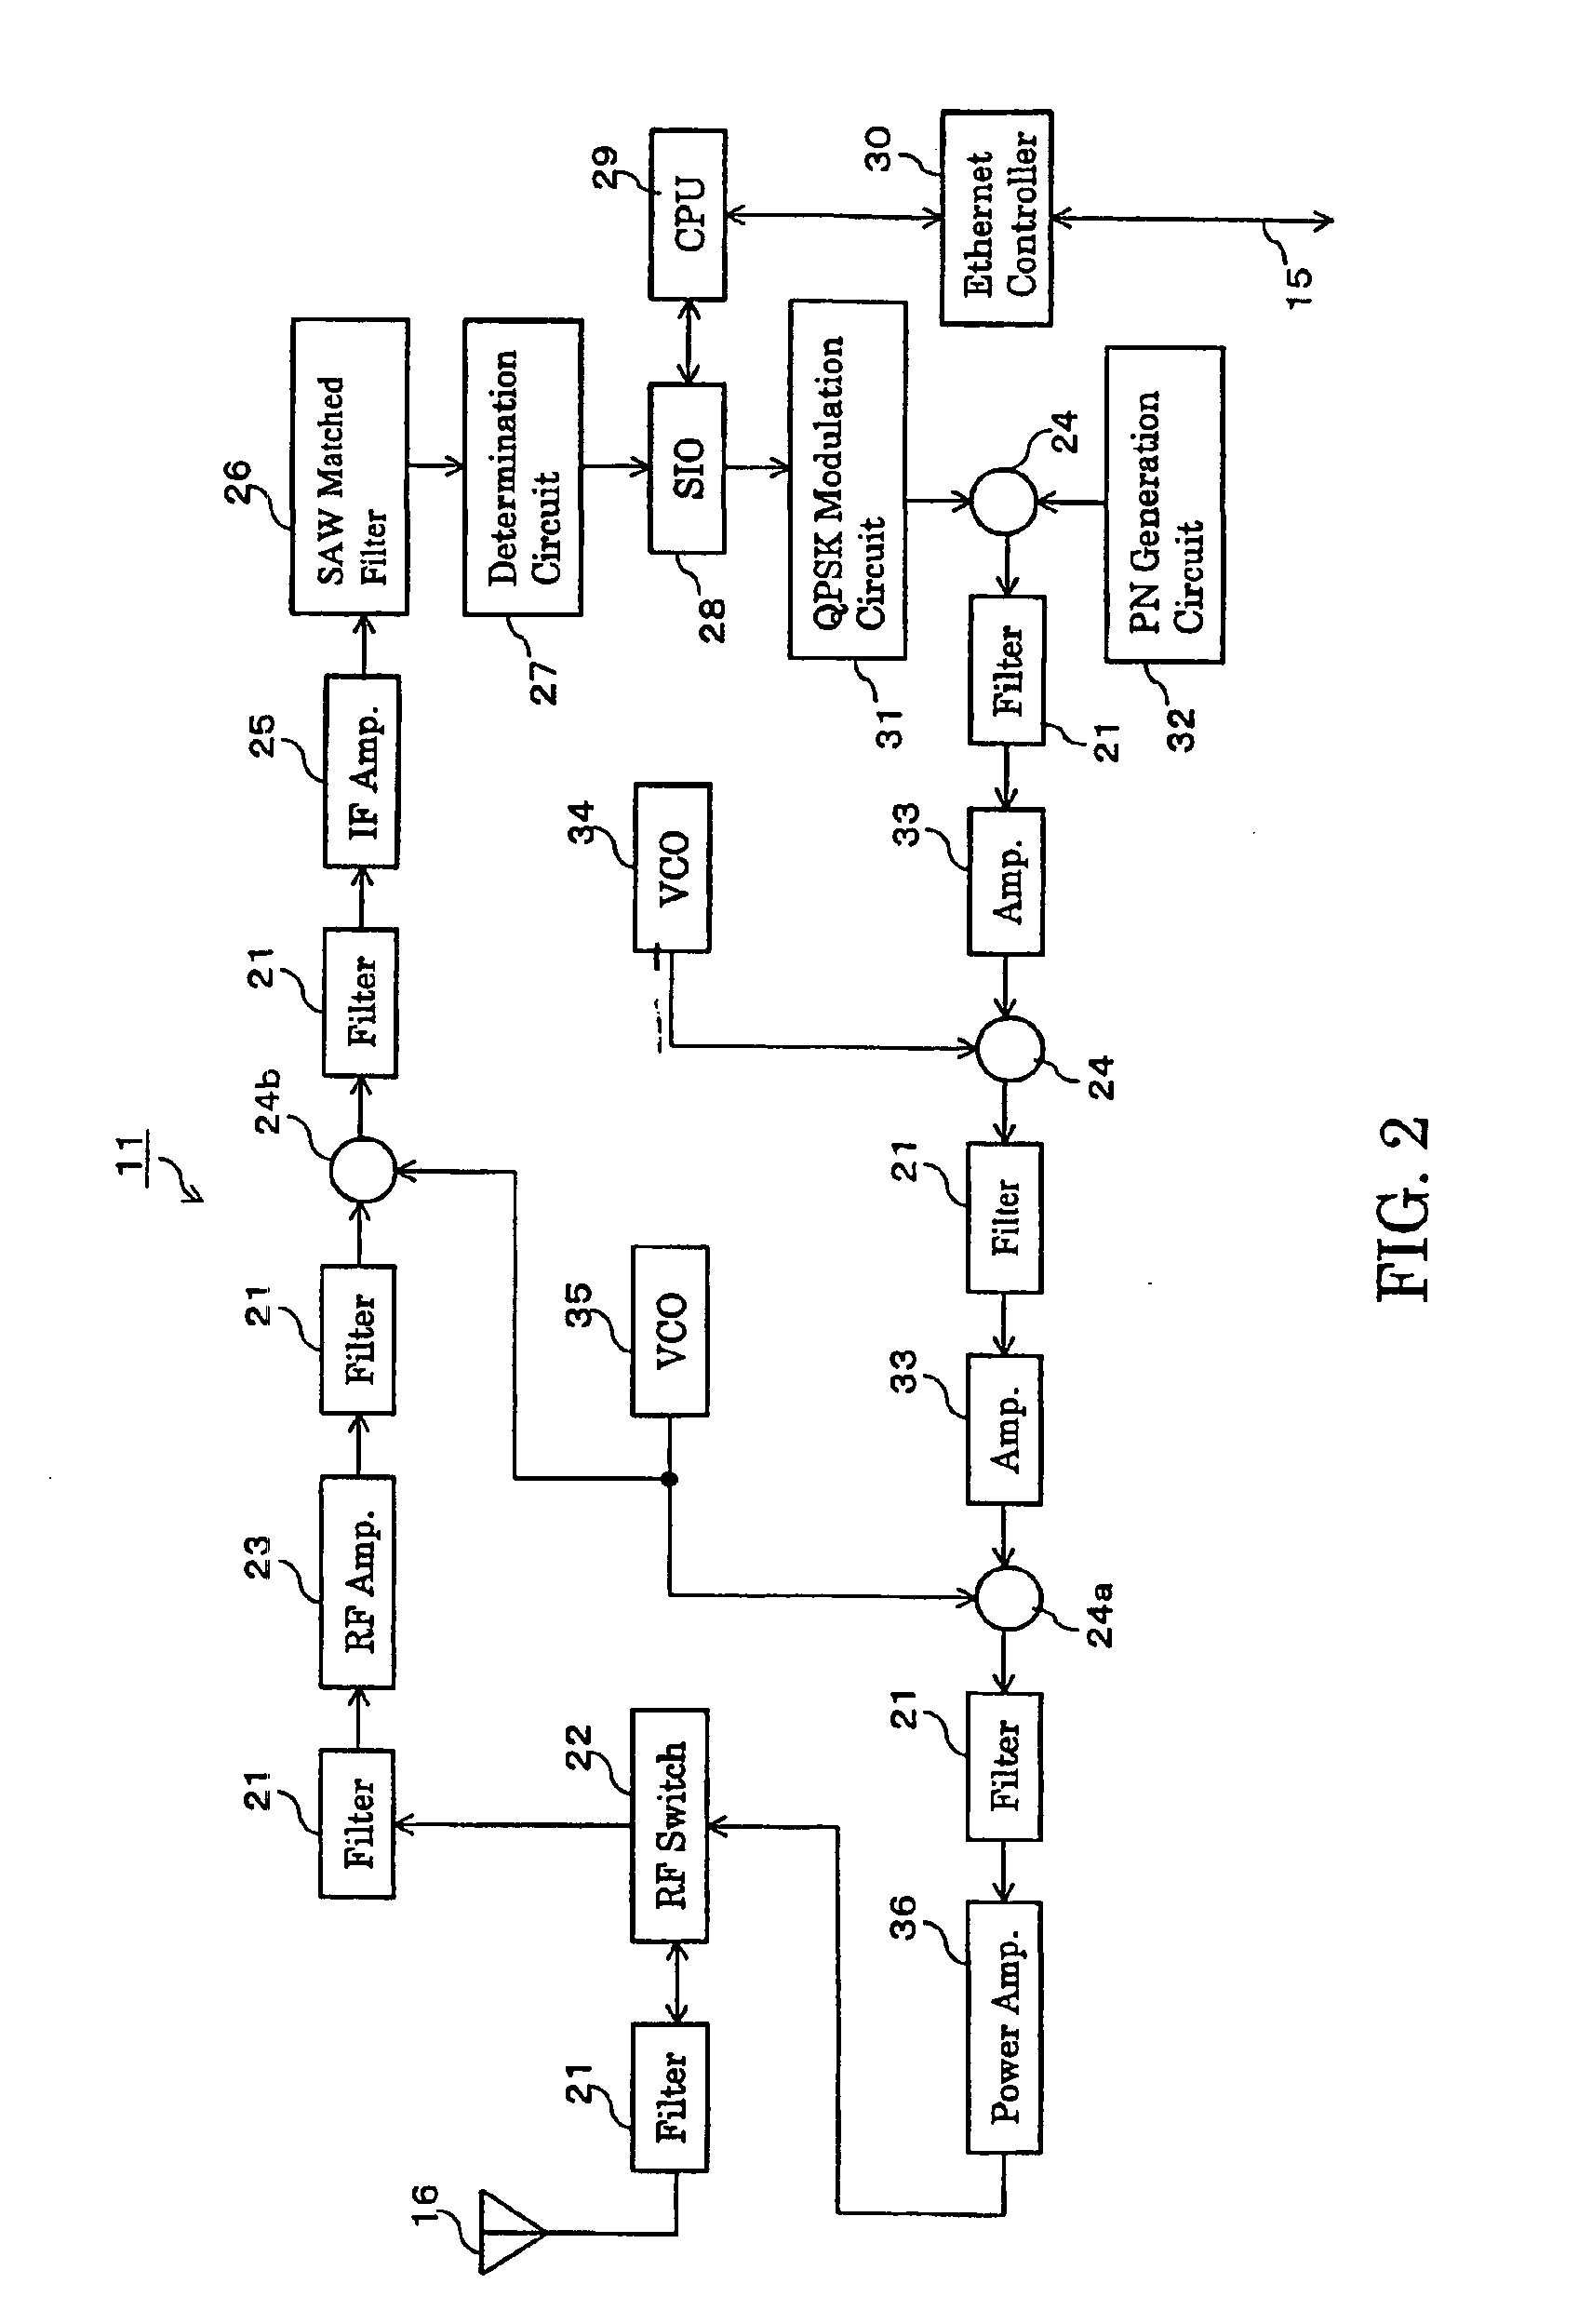 Automated guided vehicle, operation control system and method for the same, and automotive vehicle